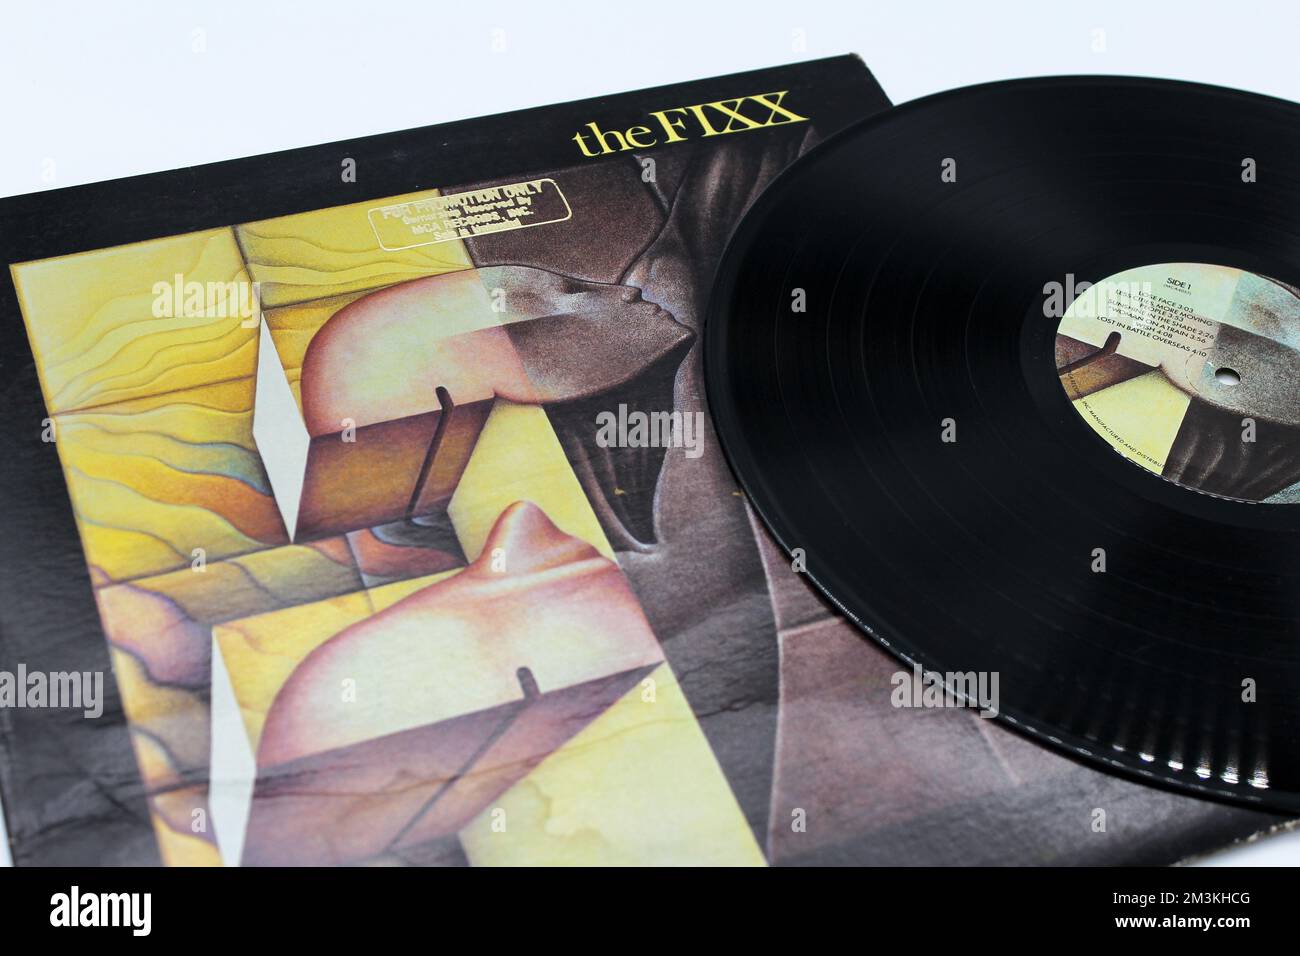 Phantoms is the third studio album by English new wave band the Fixx  on vinyl record LP disc. Album cover. Stock Photo